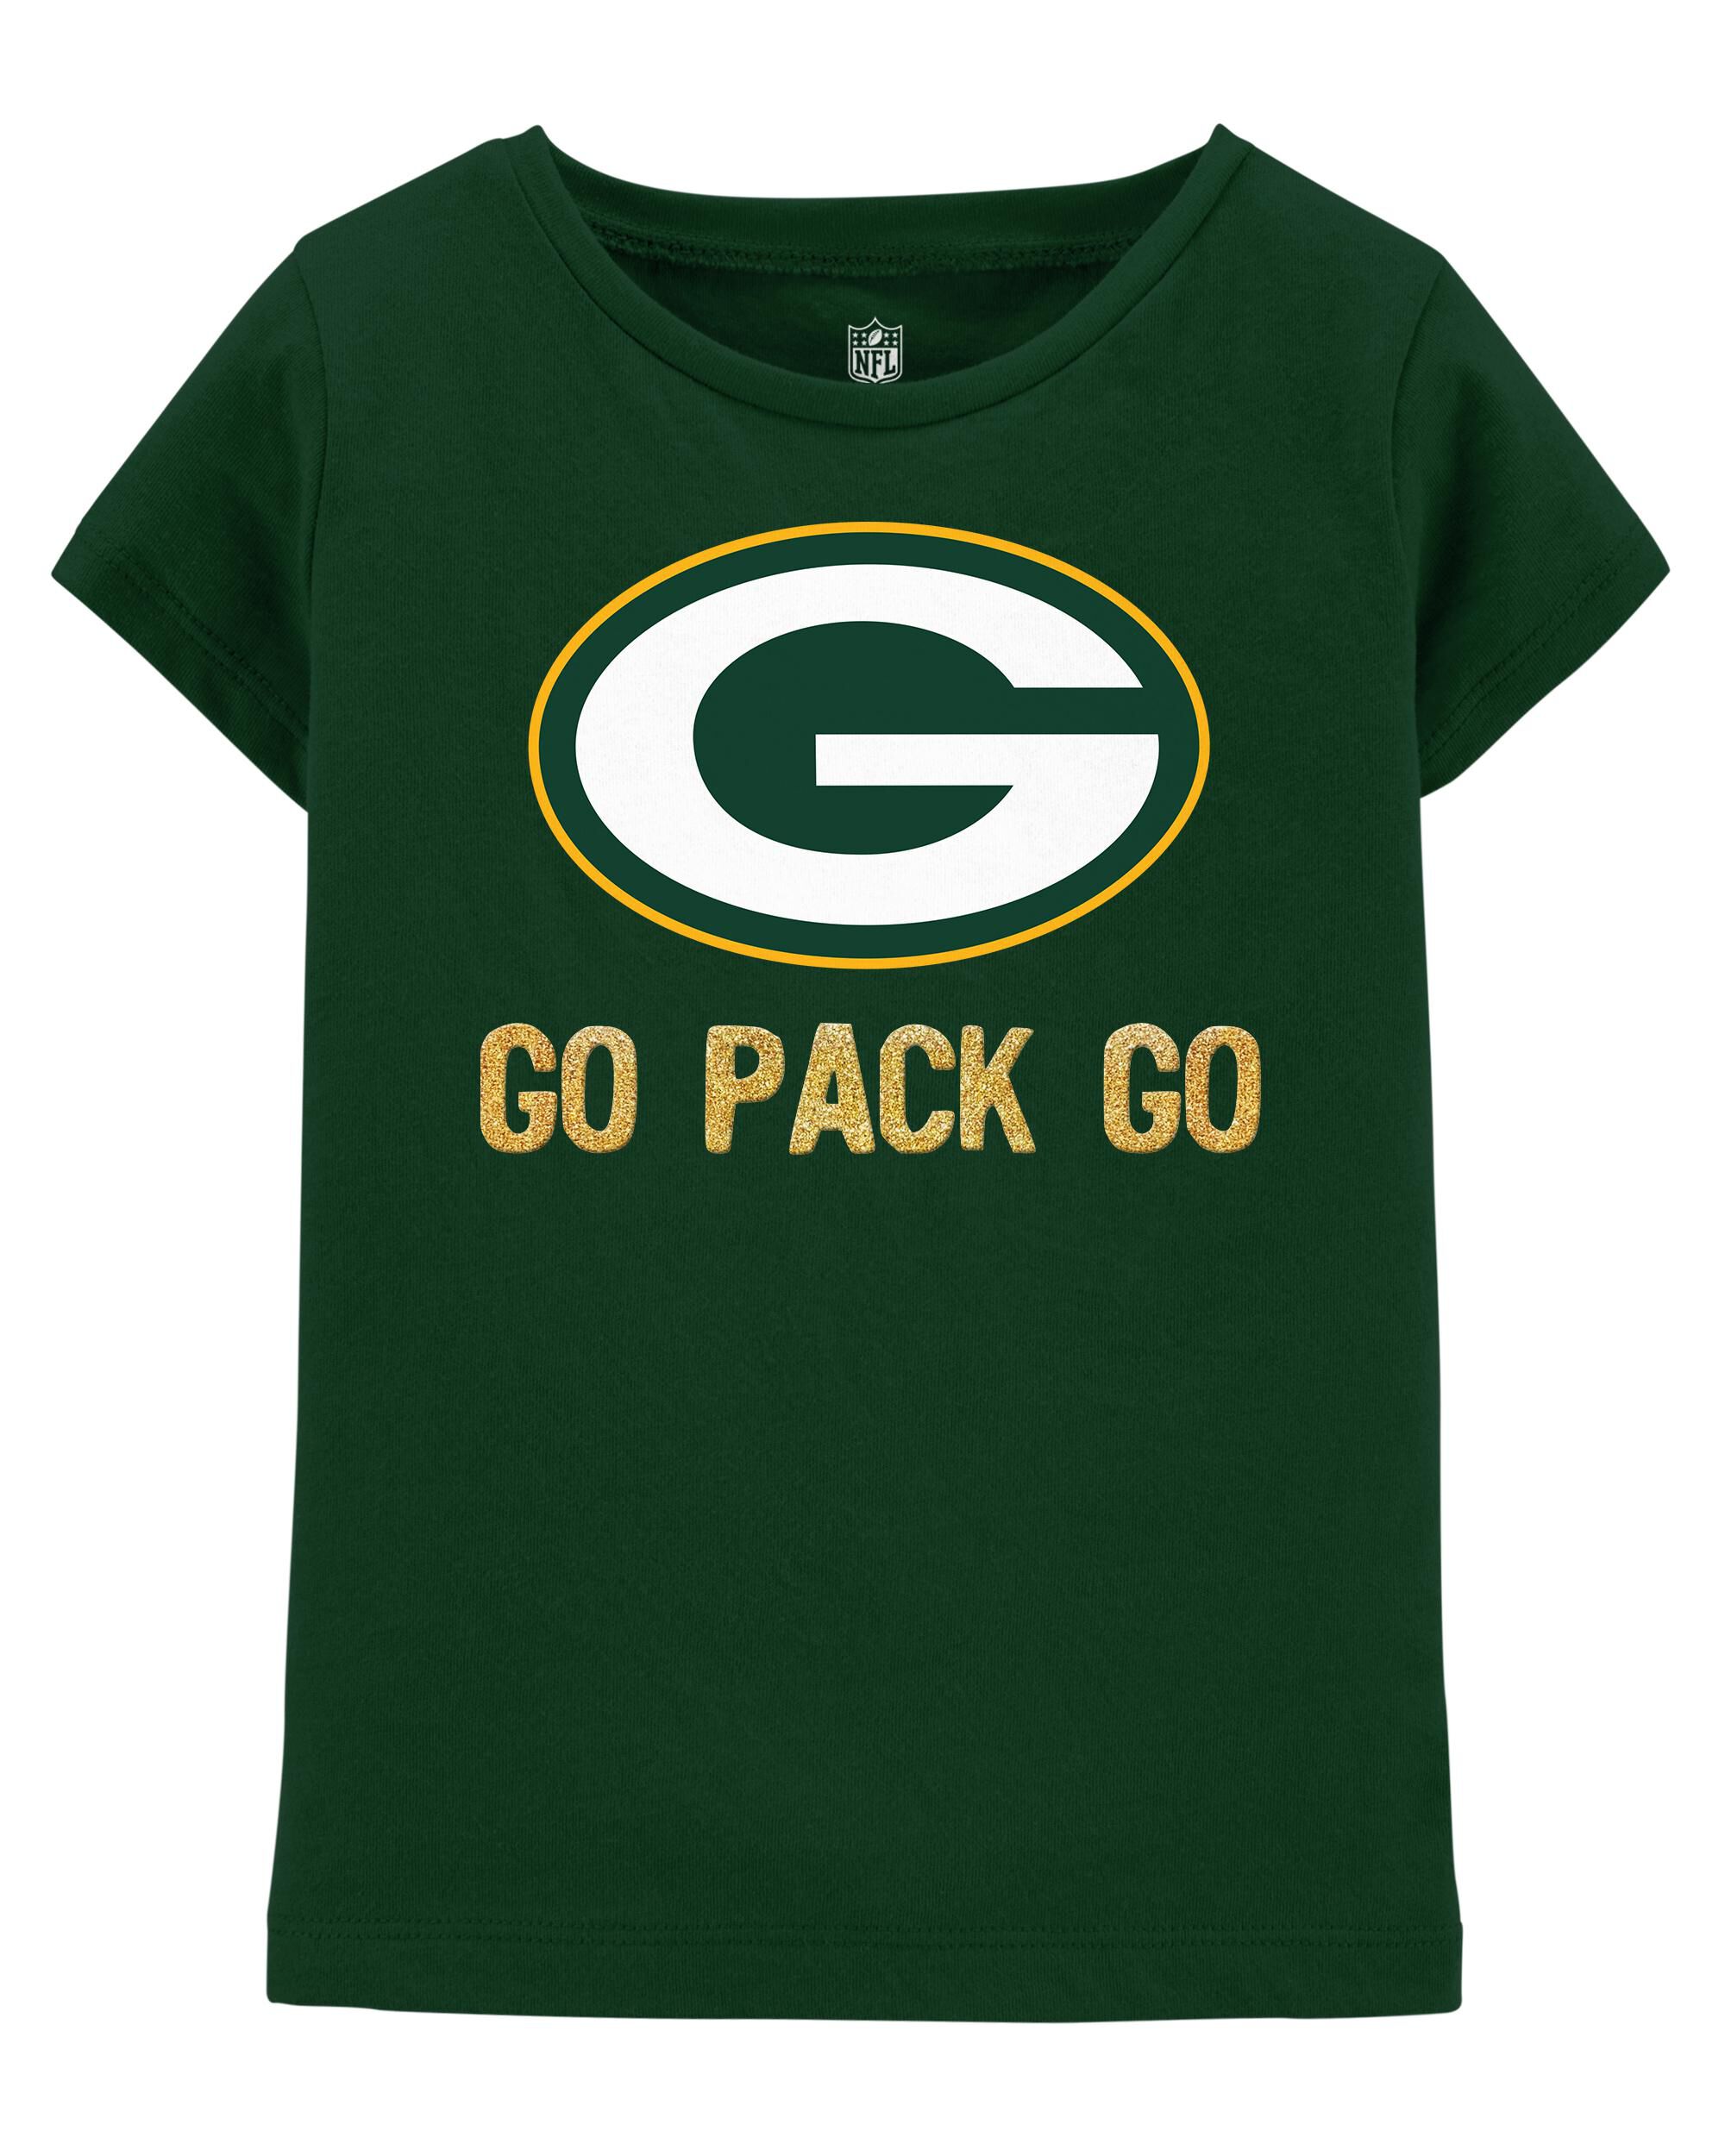 where can i buy a green bay packers shirt